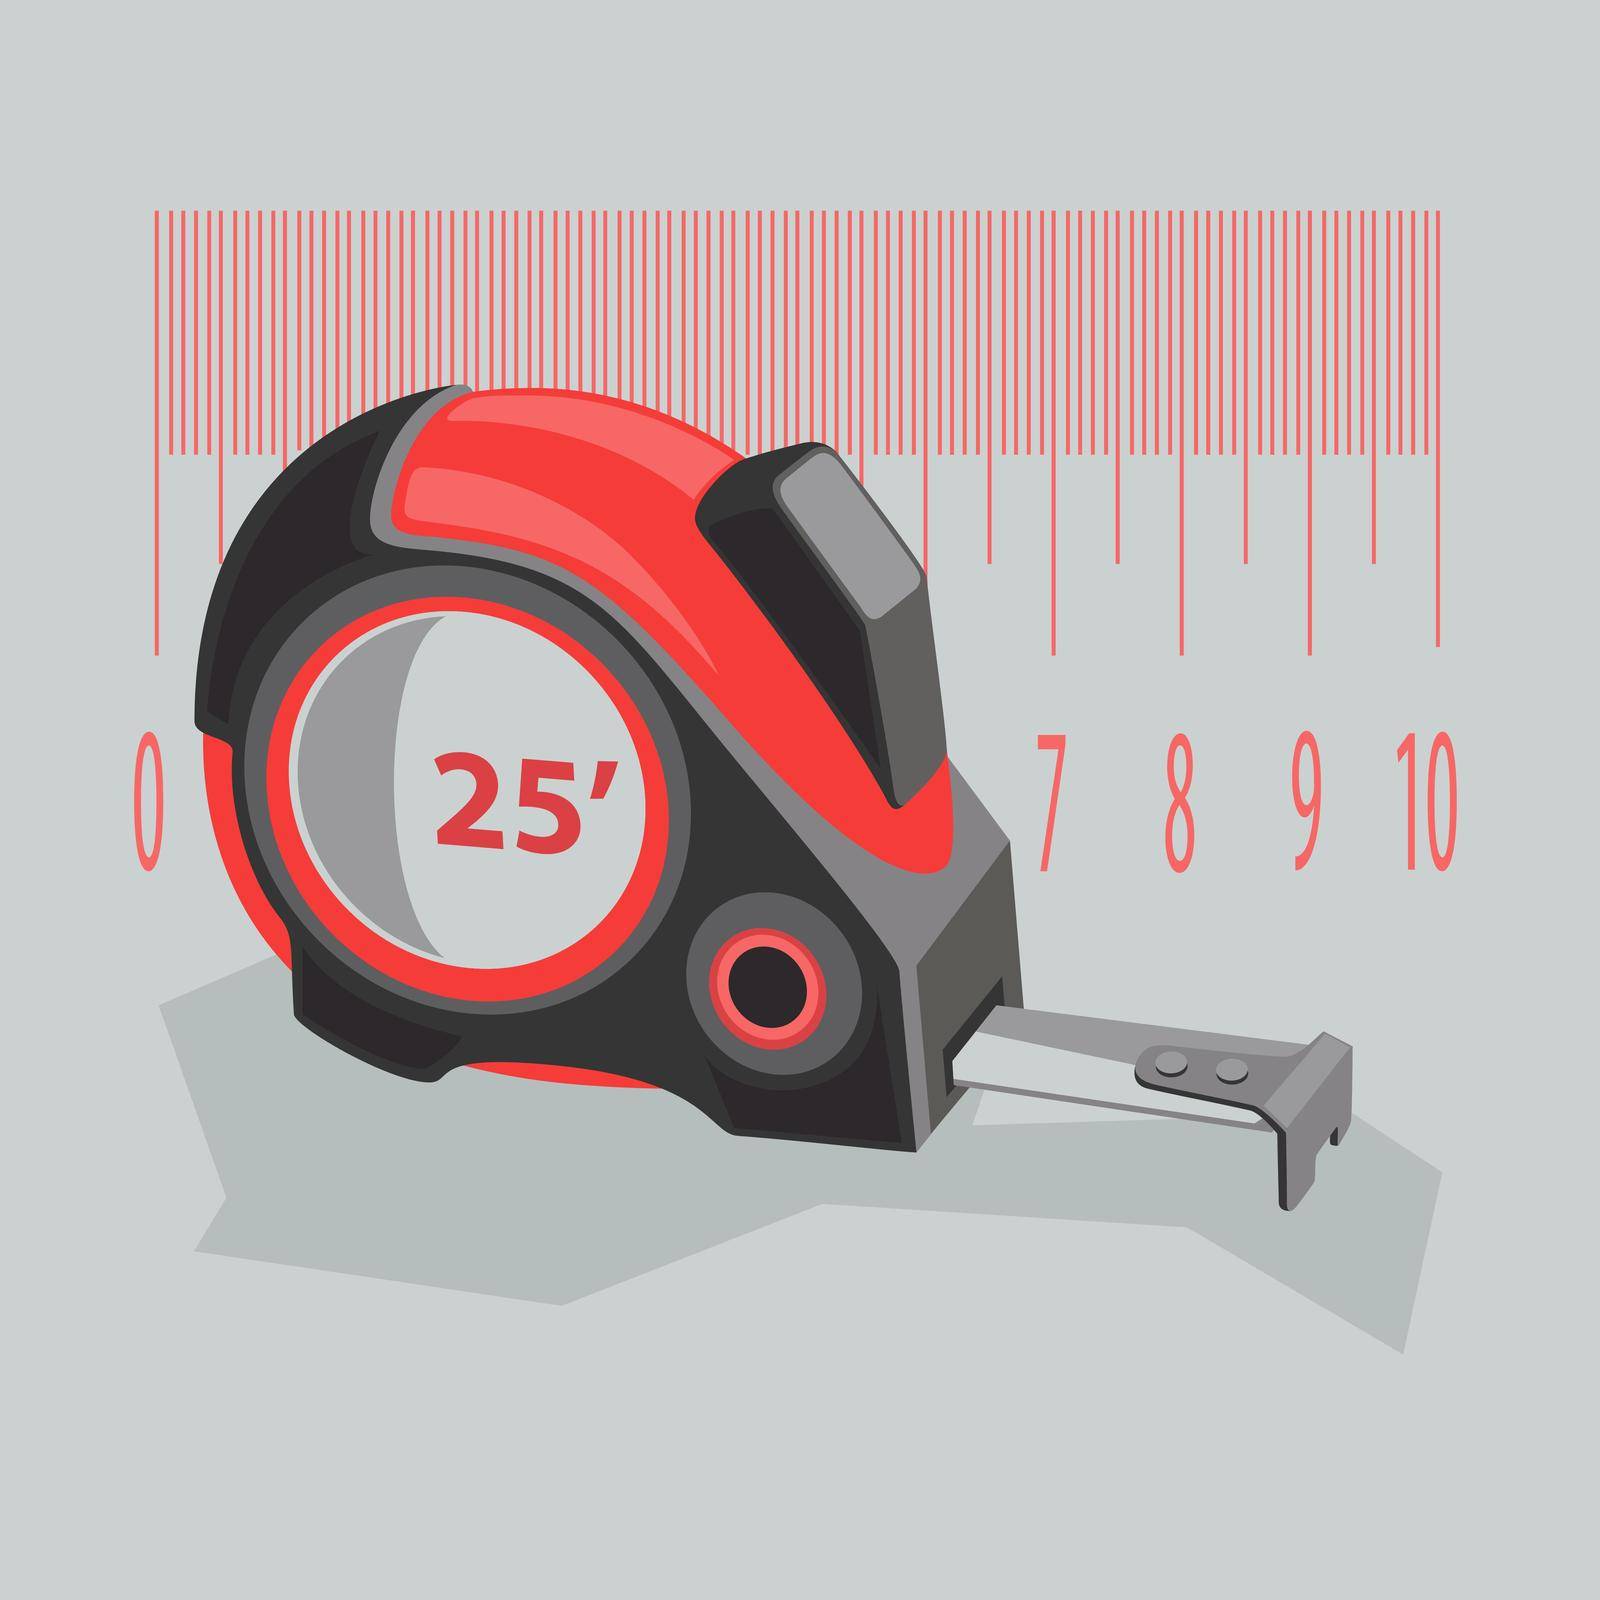 Measuring tape of red color on a gray background. Stylized construction tools with numbers. Stock vector illustration of a flat.